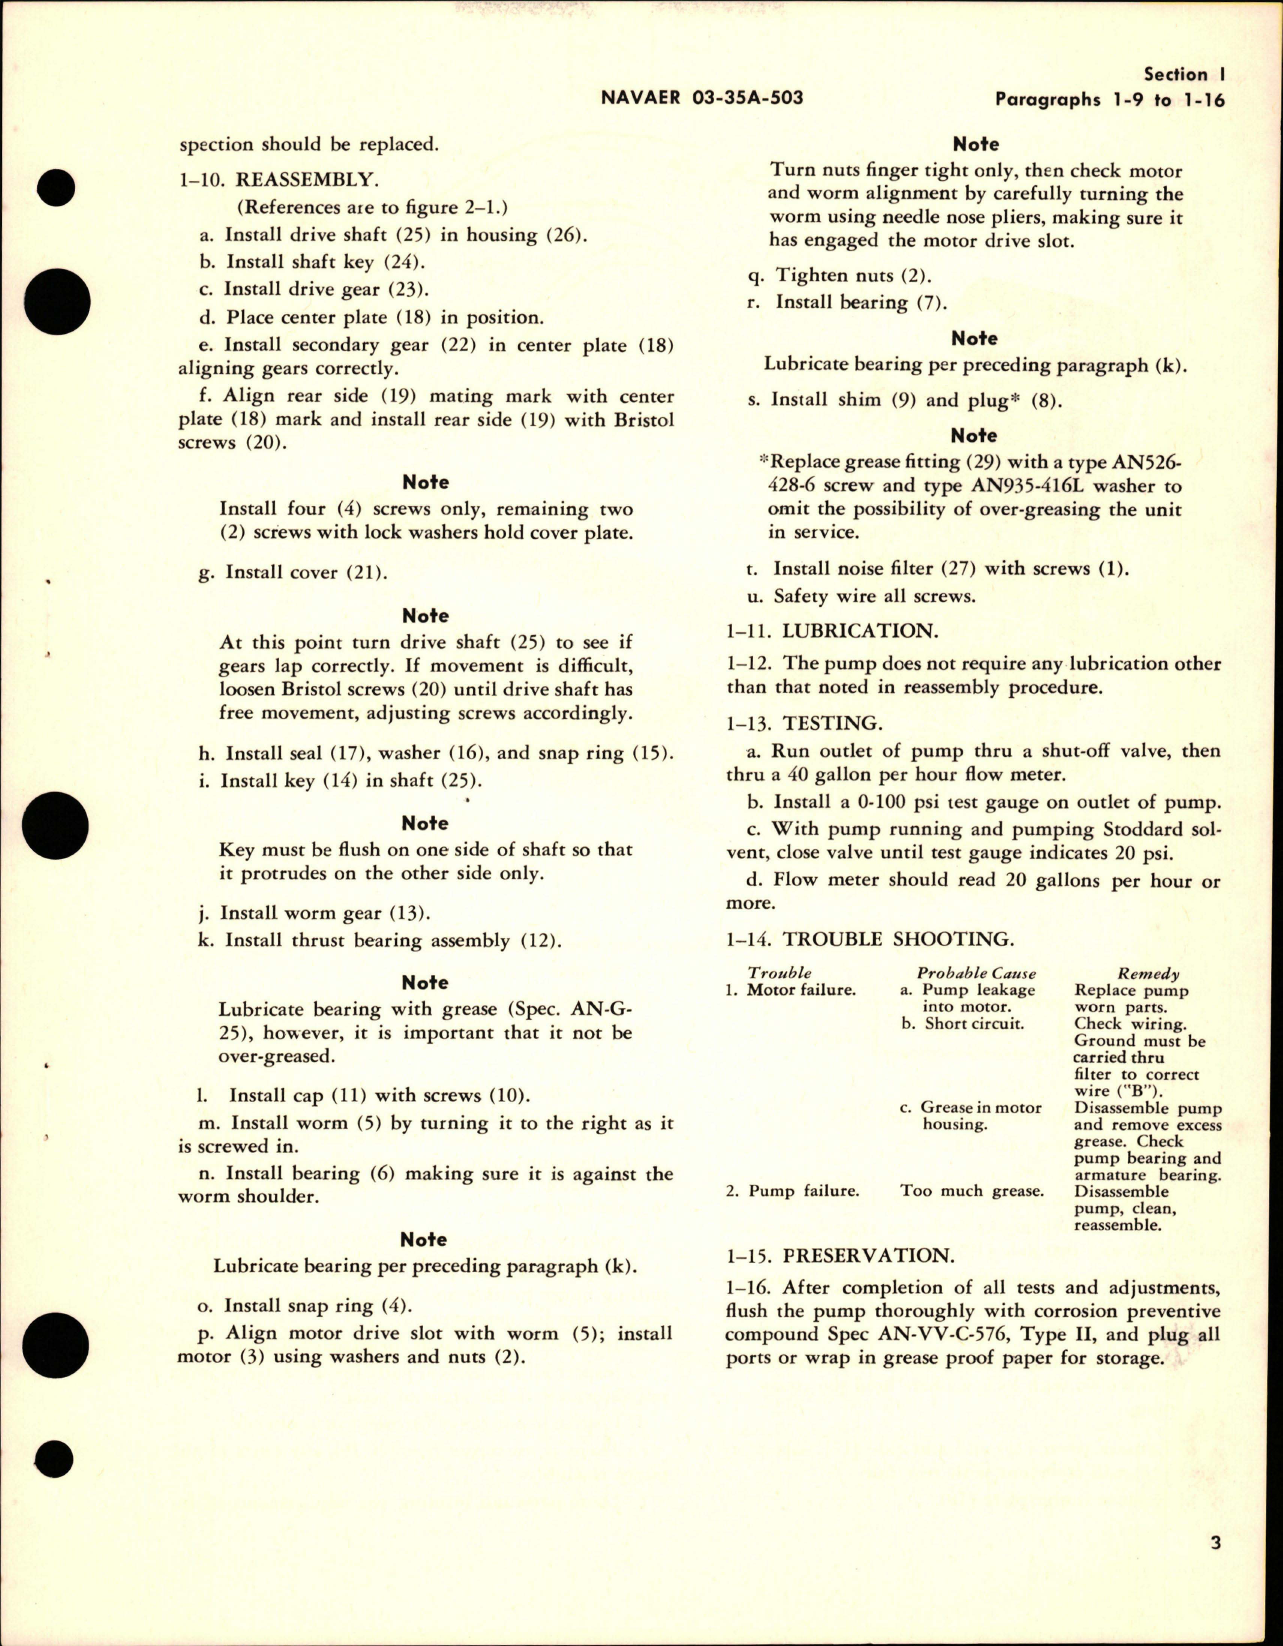 Sample page 5 from AirCorps Library document: Overhaul Instructions with Parts Catalog for Windshield Degreaser Pump - Model 1505-5 